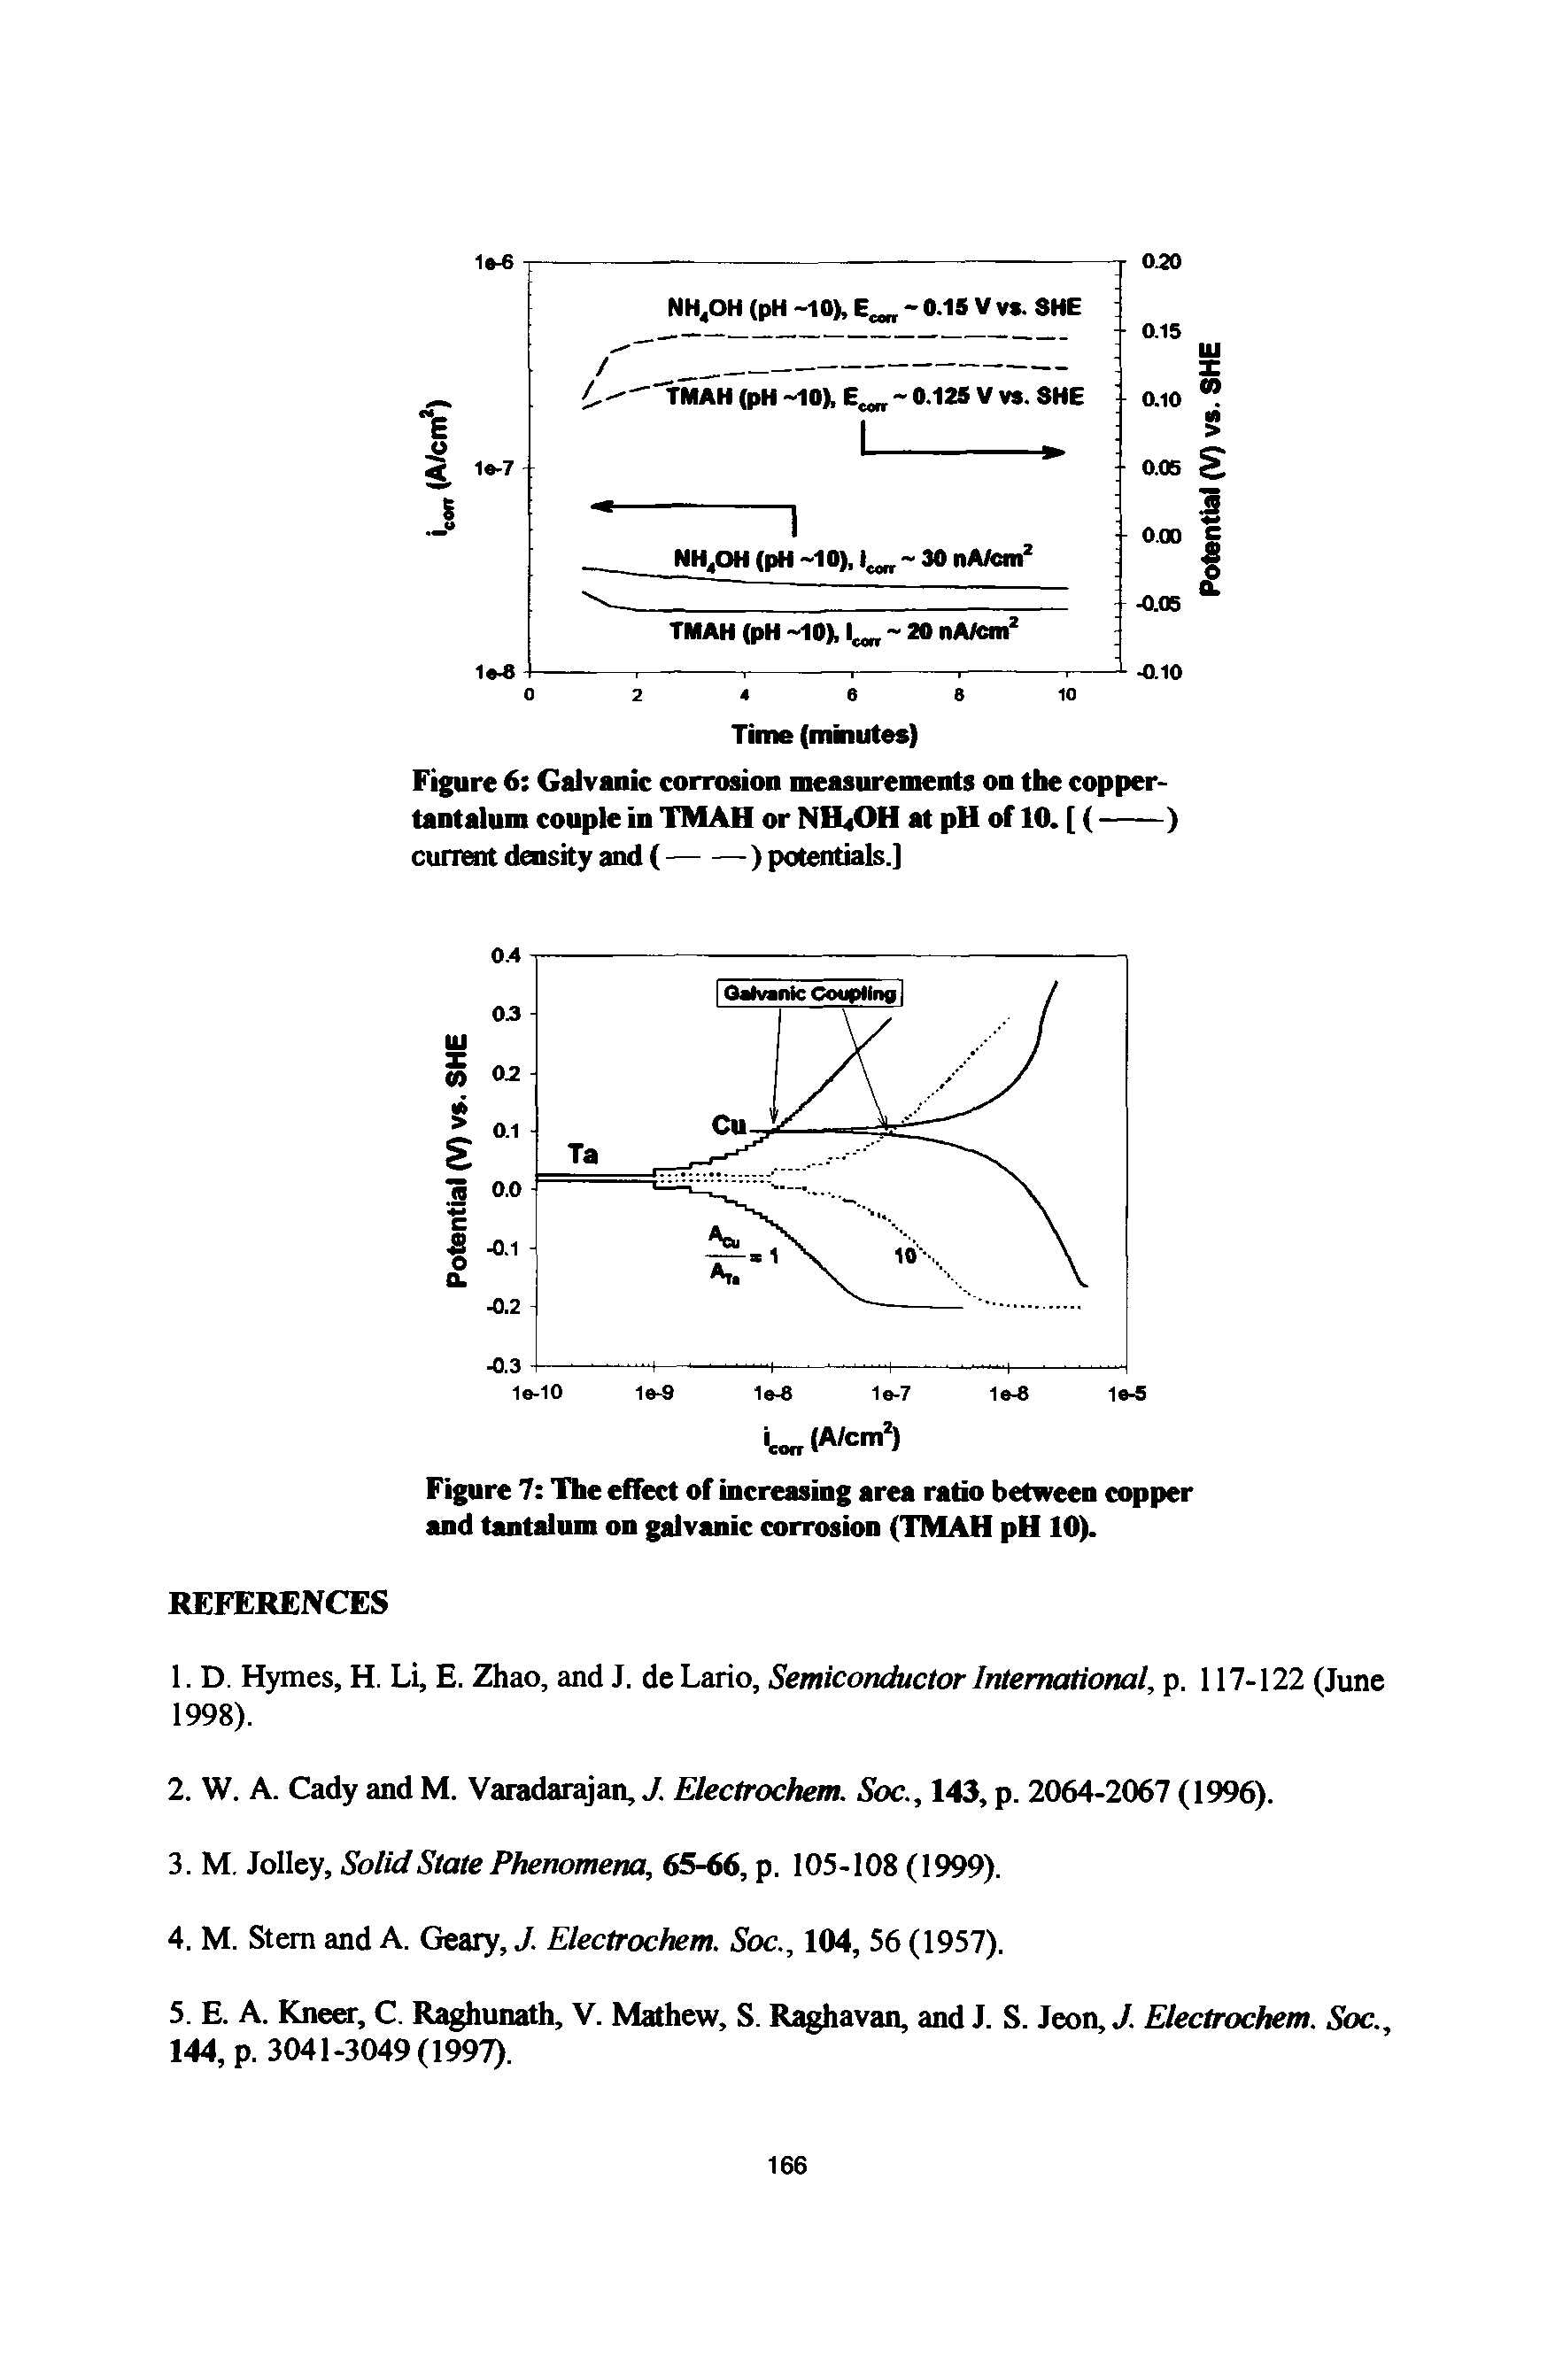 Figure 7 The effect of increasing area ratio between copper and tantalnm on galvanic corrosion (TMAH pH 10).